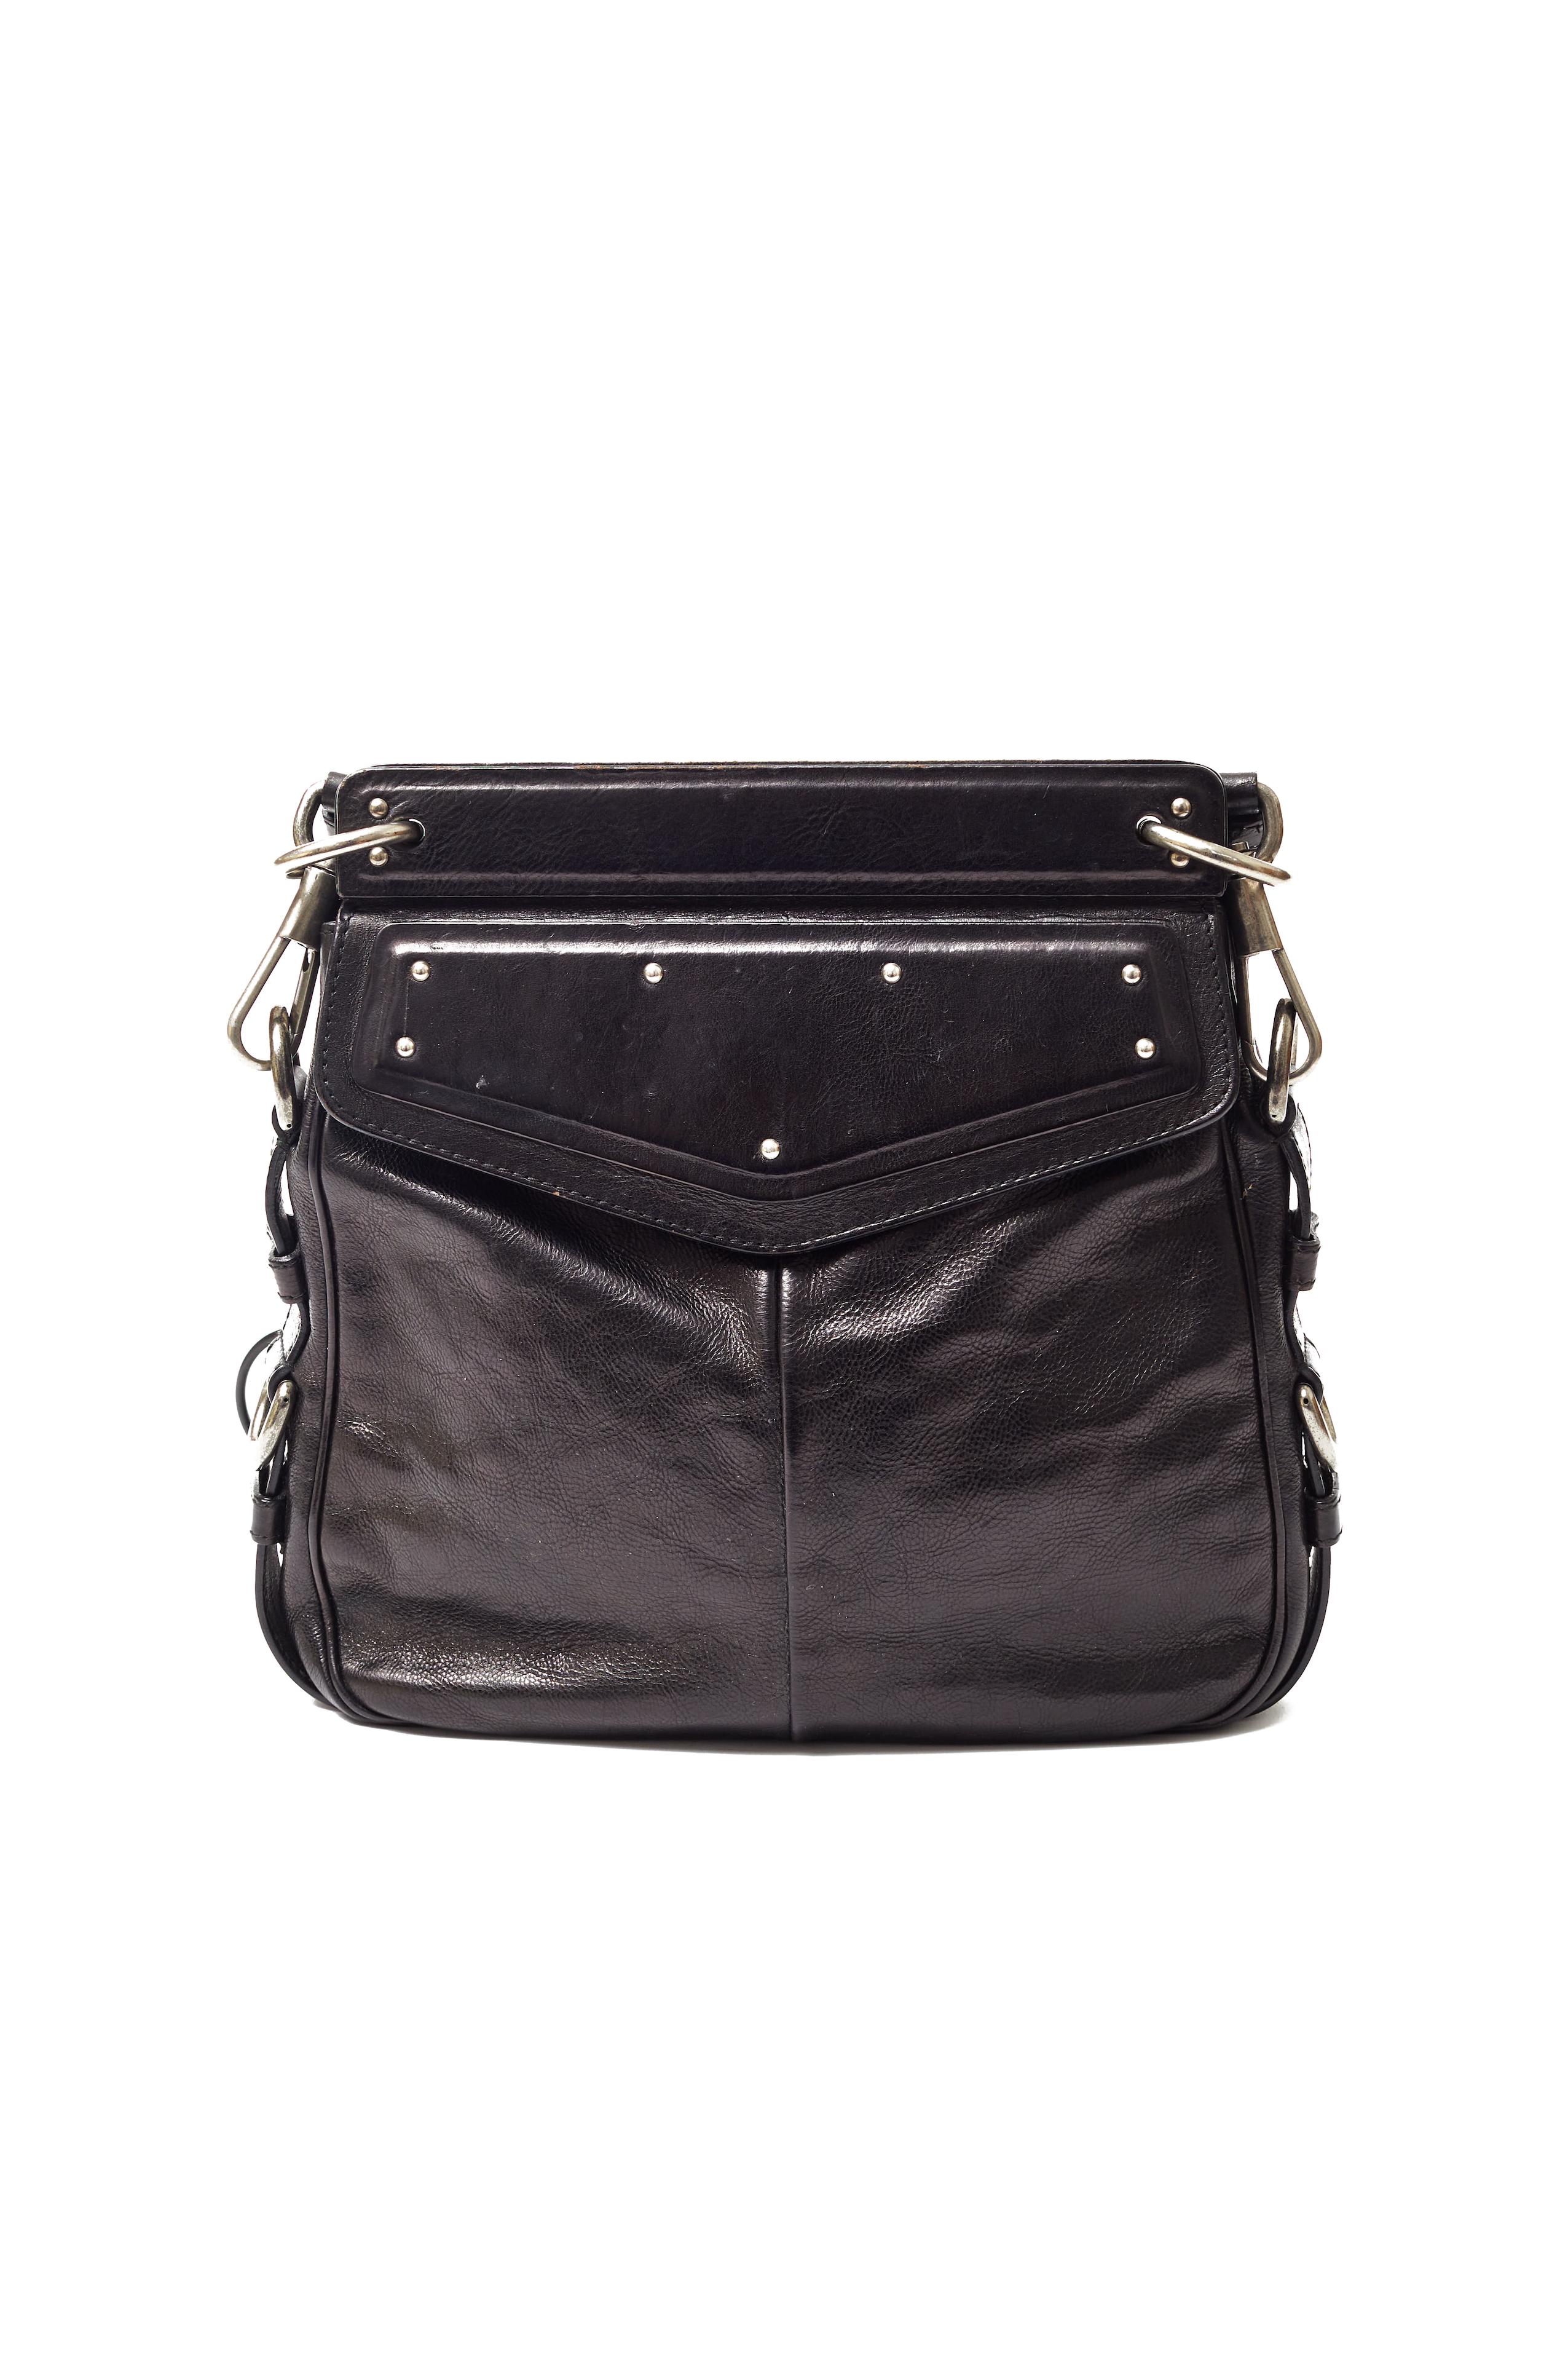 Dating to the S/S 2002 collection designed by Tom Ford, this Mombassa bag by Yves Saint Laurent is made from distressed black leather with silver studding and a silver embellished horn handle. Fully lined in black suede, this closes with a magnetic